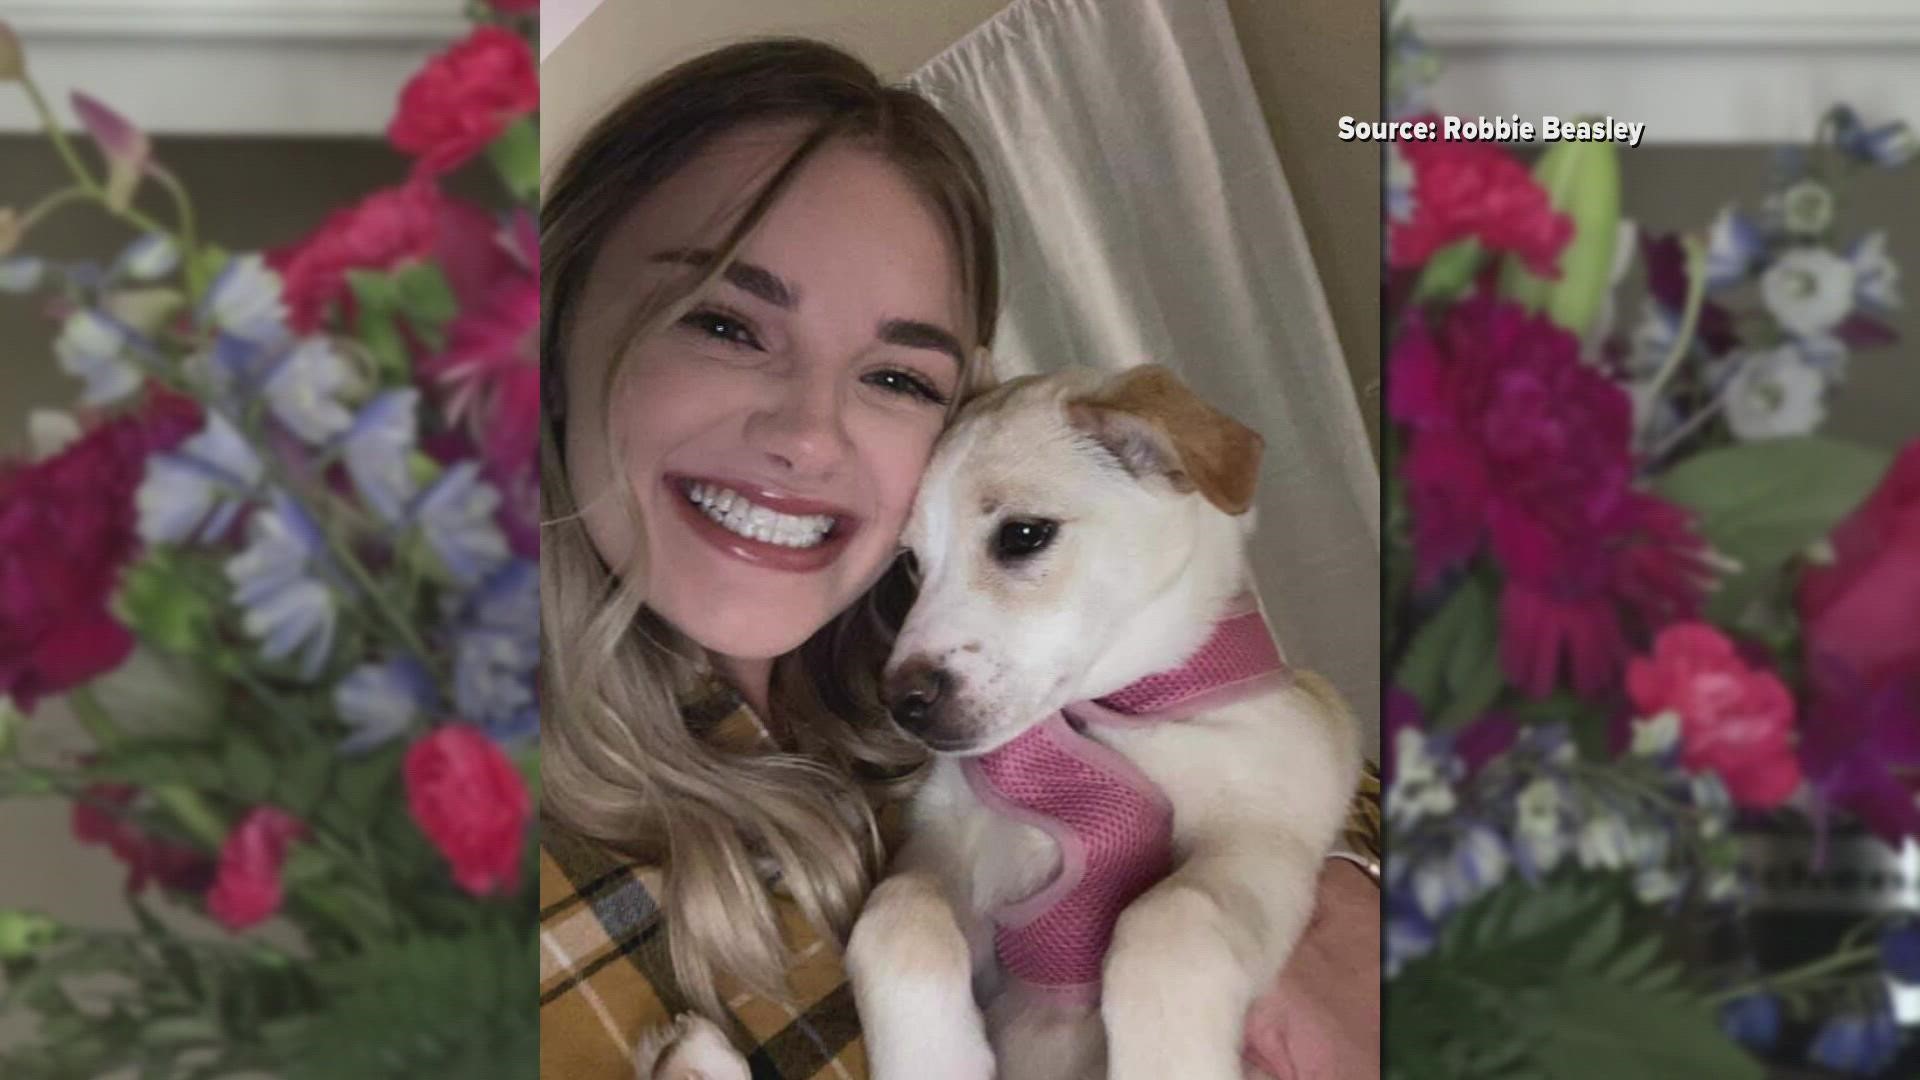 A family from Davidson County is mourning the loss of their daughter. The late 23-year-old's father said support from the community has helped see them through.